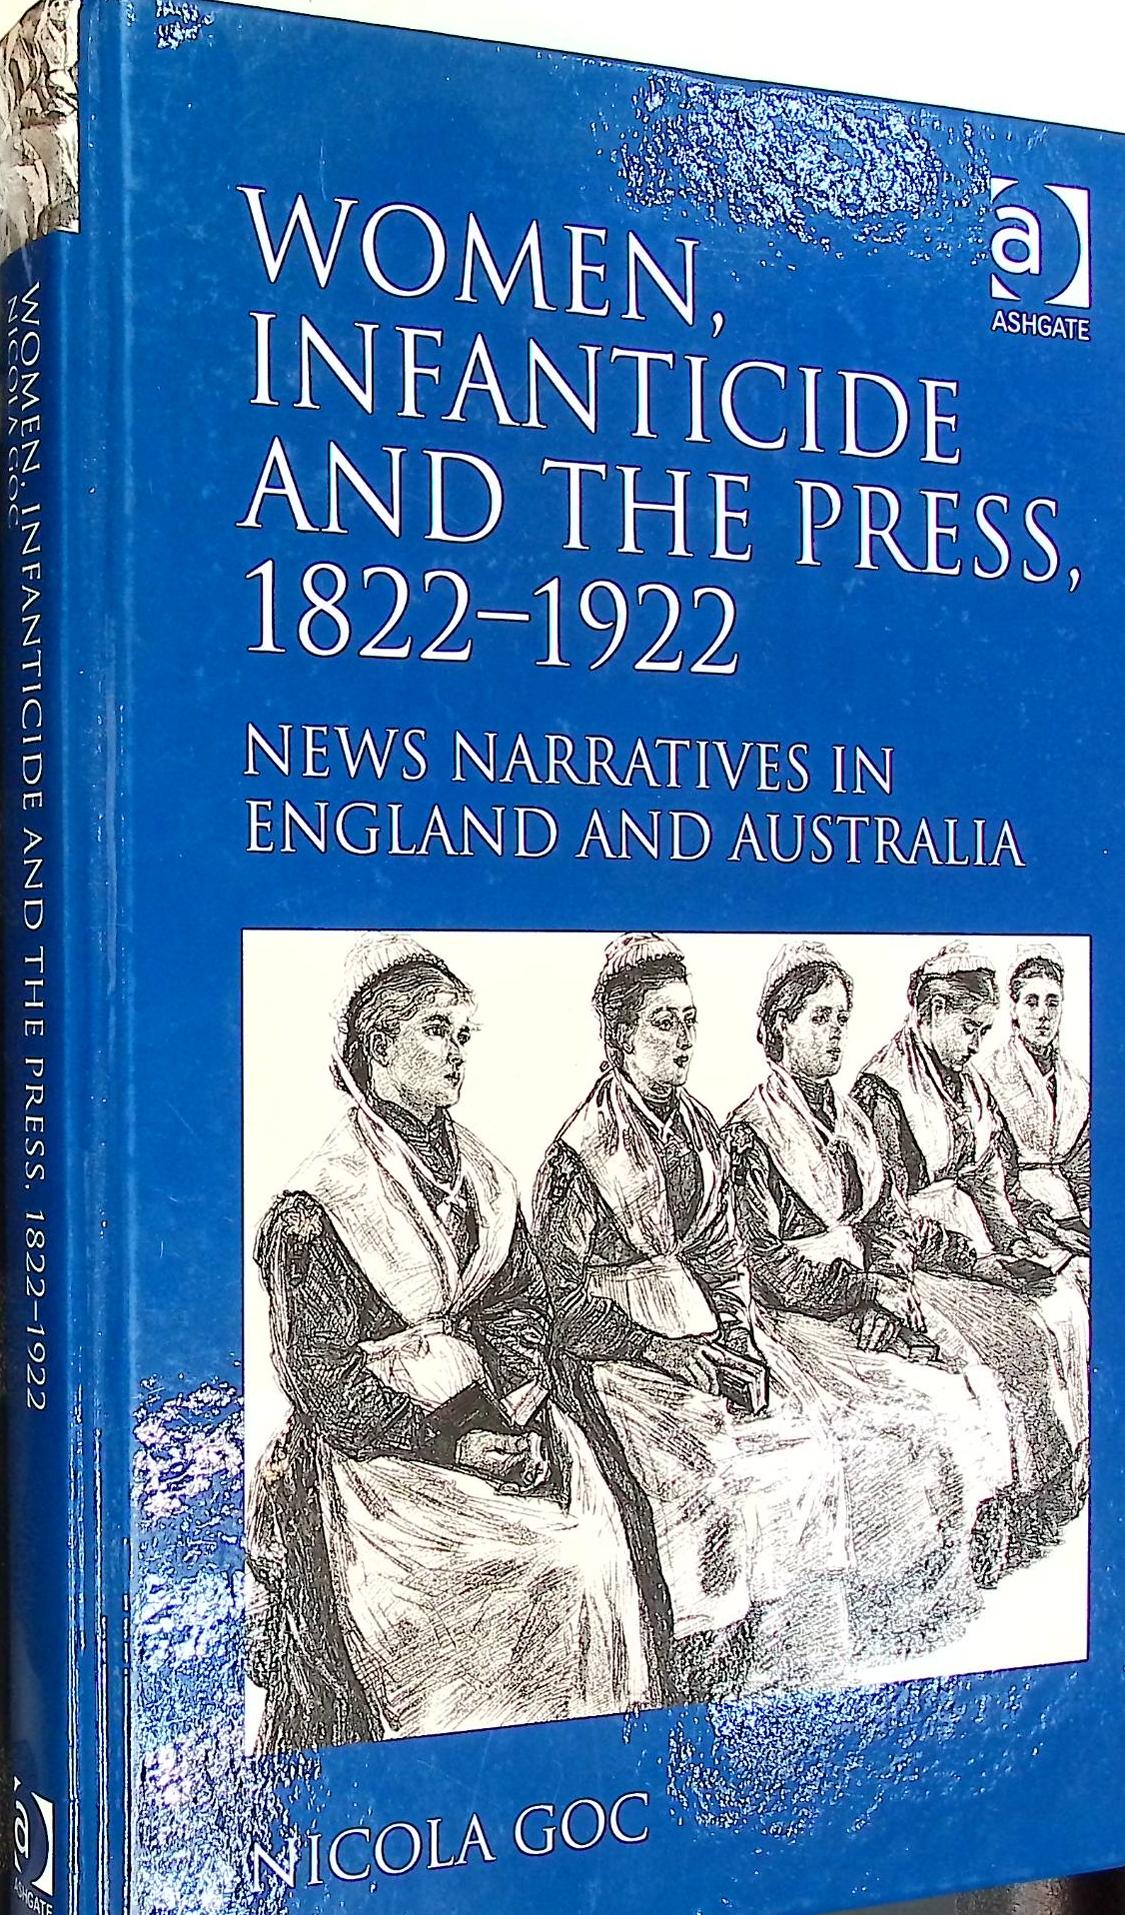 Women, Infanticide and the Press 1822-1922. News Narratives in England and Australia.